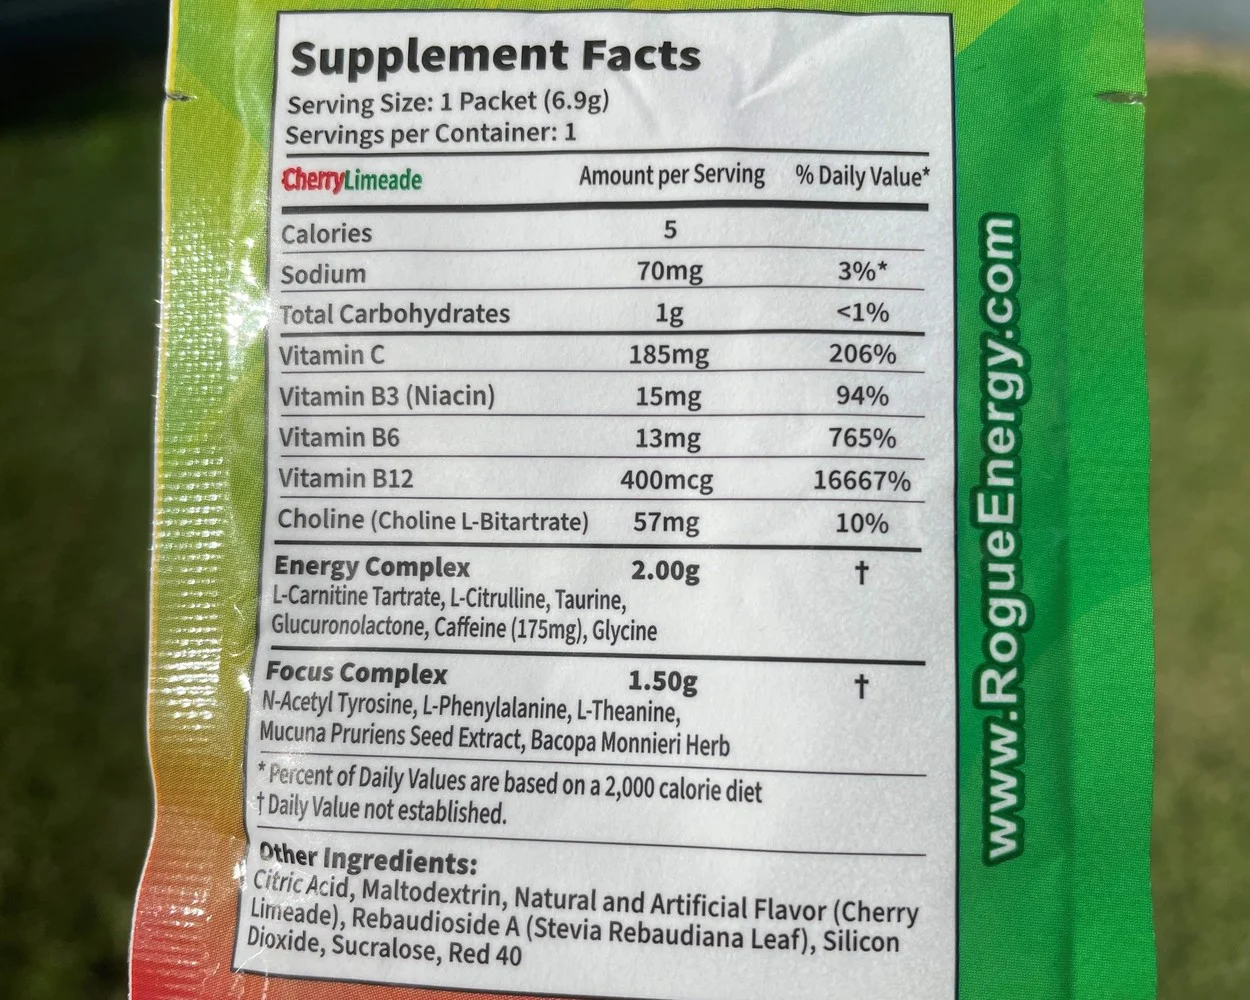 Rouge Nutrition Facts